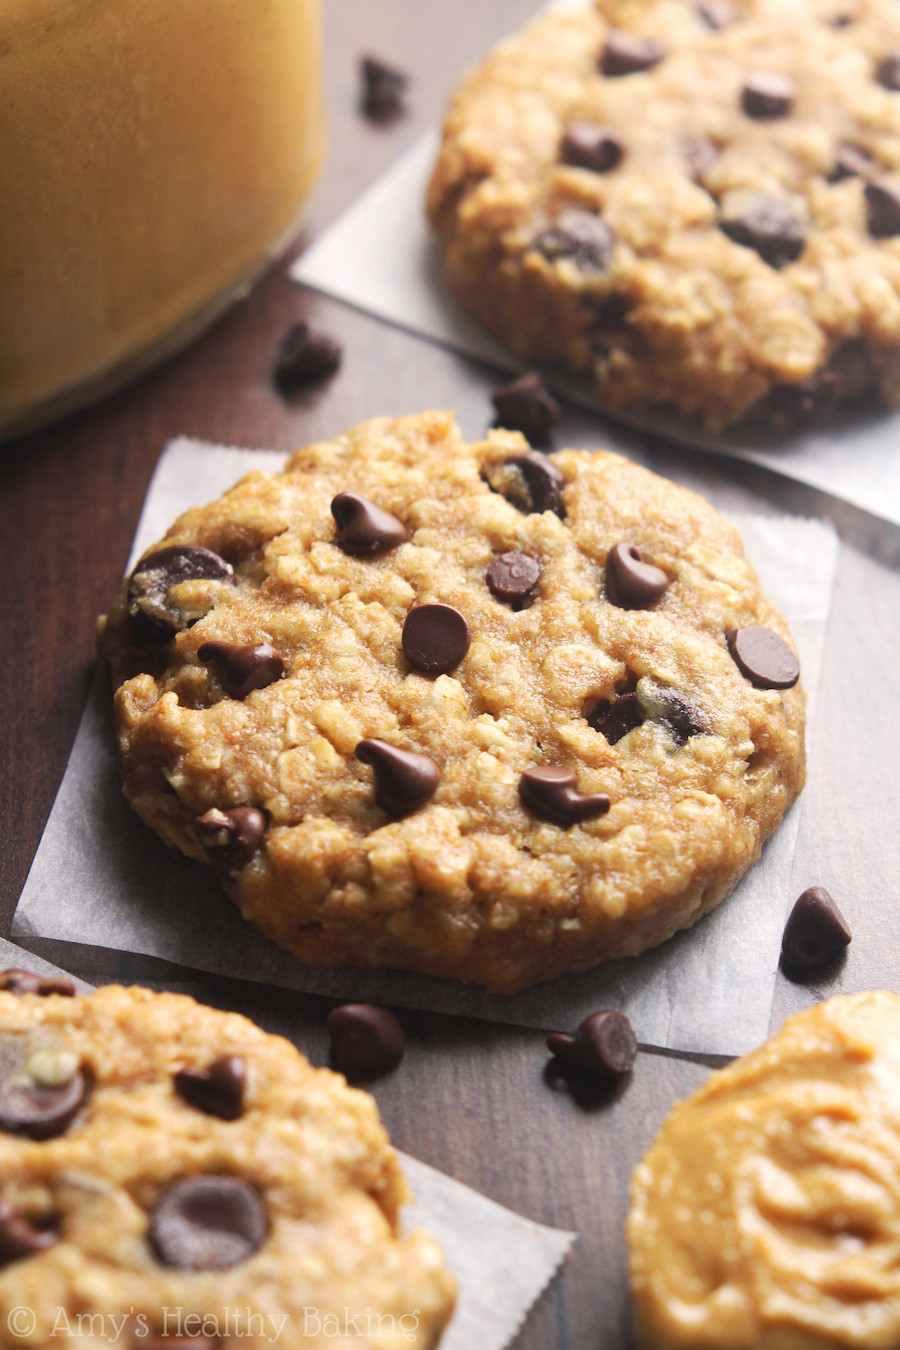 Chocolate Chip Peanut Butter Oatmeal Cookies
 Chocolate Chip Peanut Butter Oatmeal Cookies Recipe Video